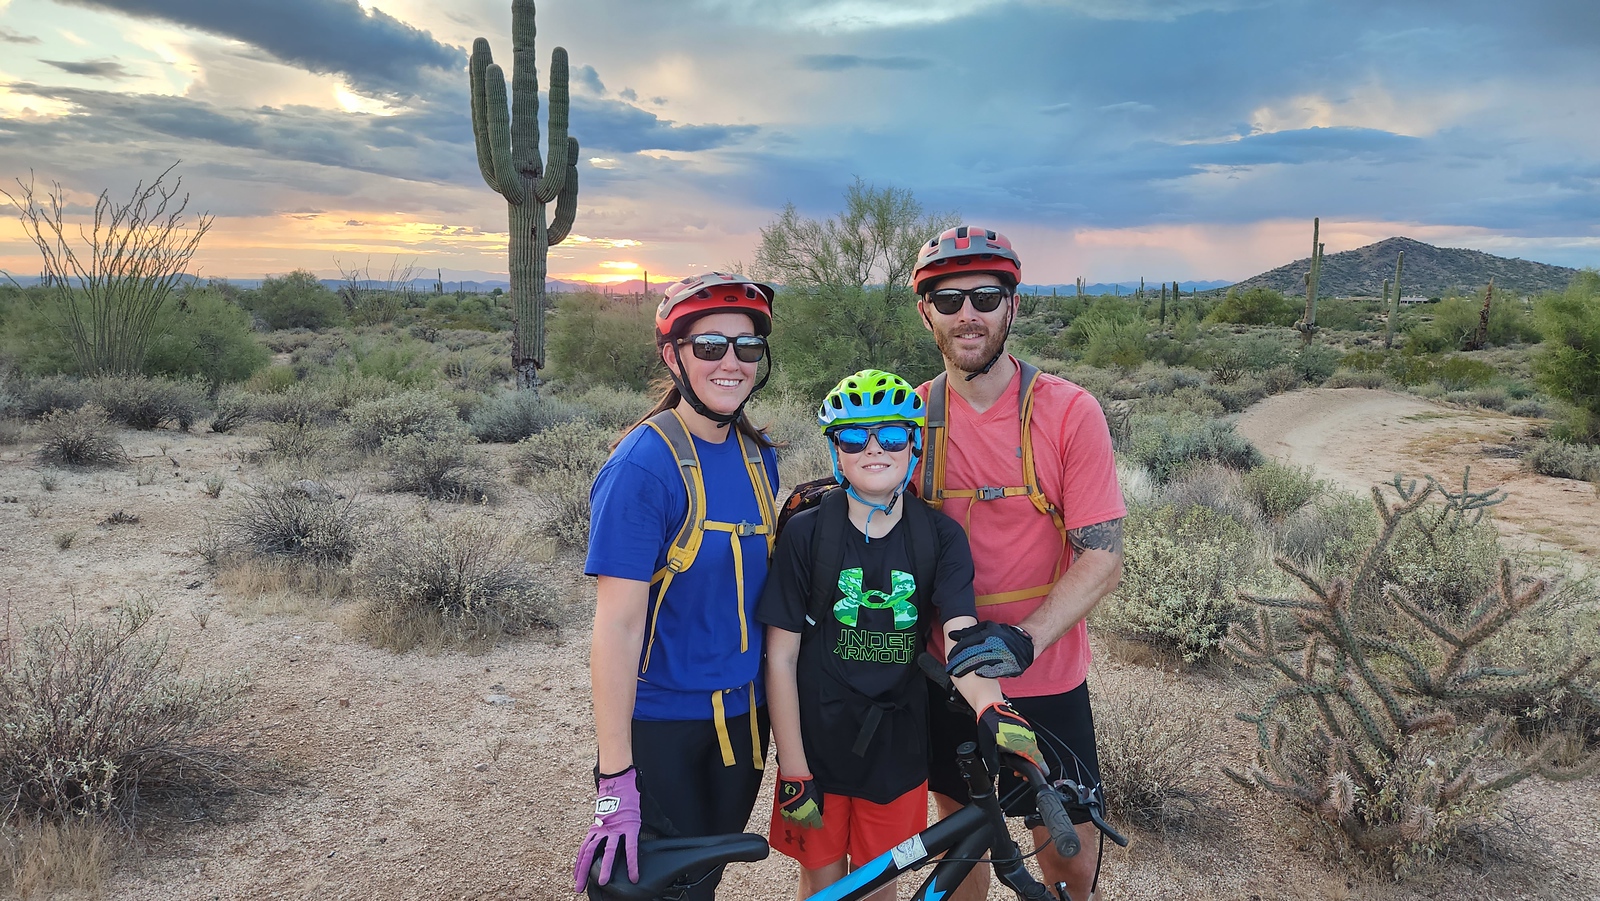 With an old southwestern backdrop and a gorgeous Arizona sunset on the horizon, a family of three pauses for a memorable vacation photo during one of the recent mountain bike tours from the Wild Bunch.